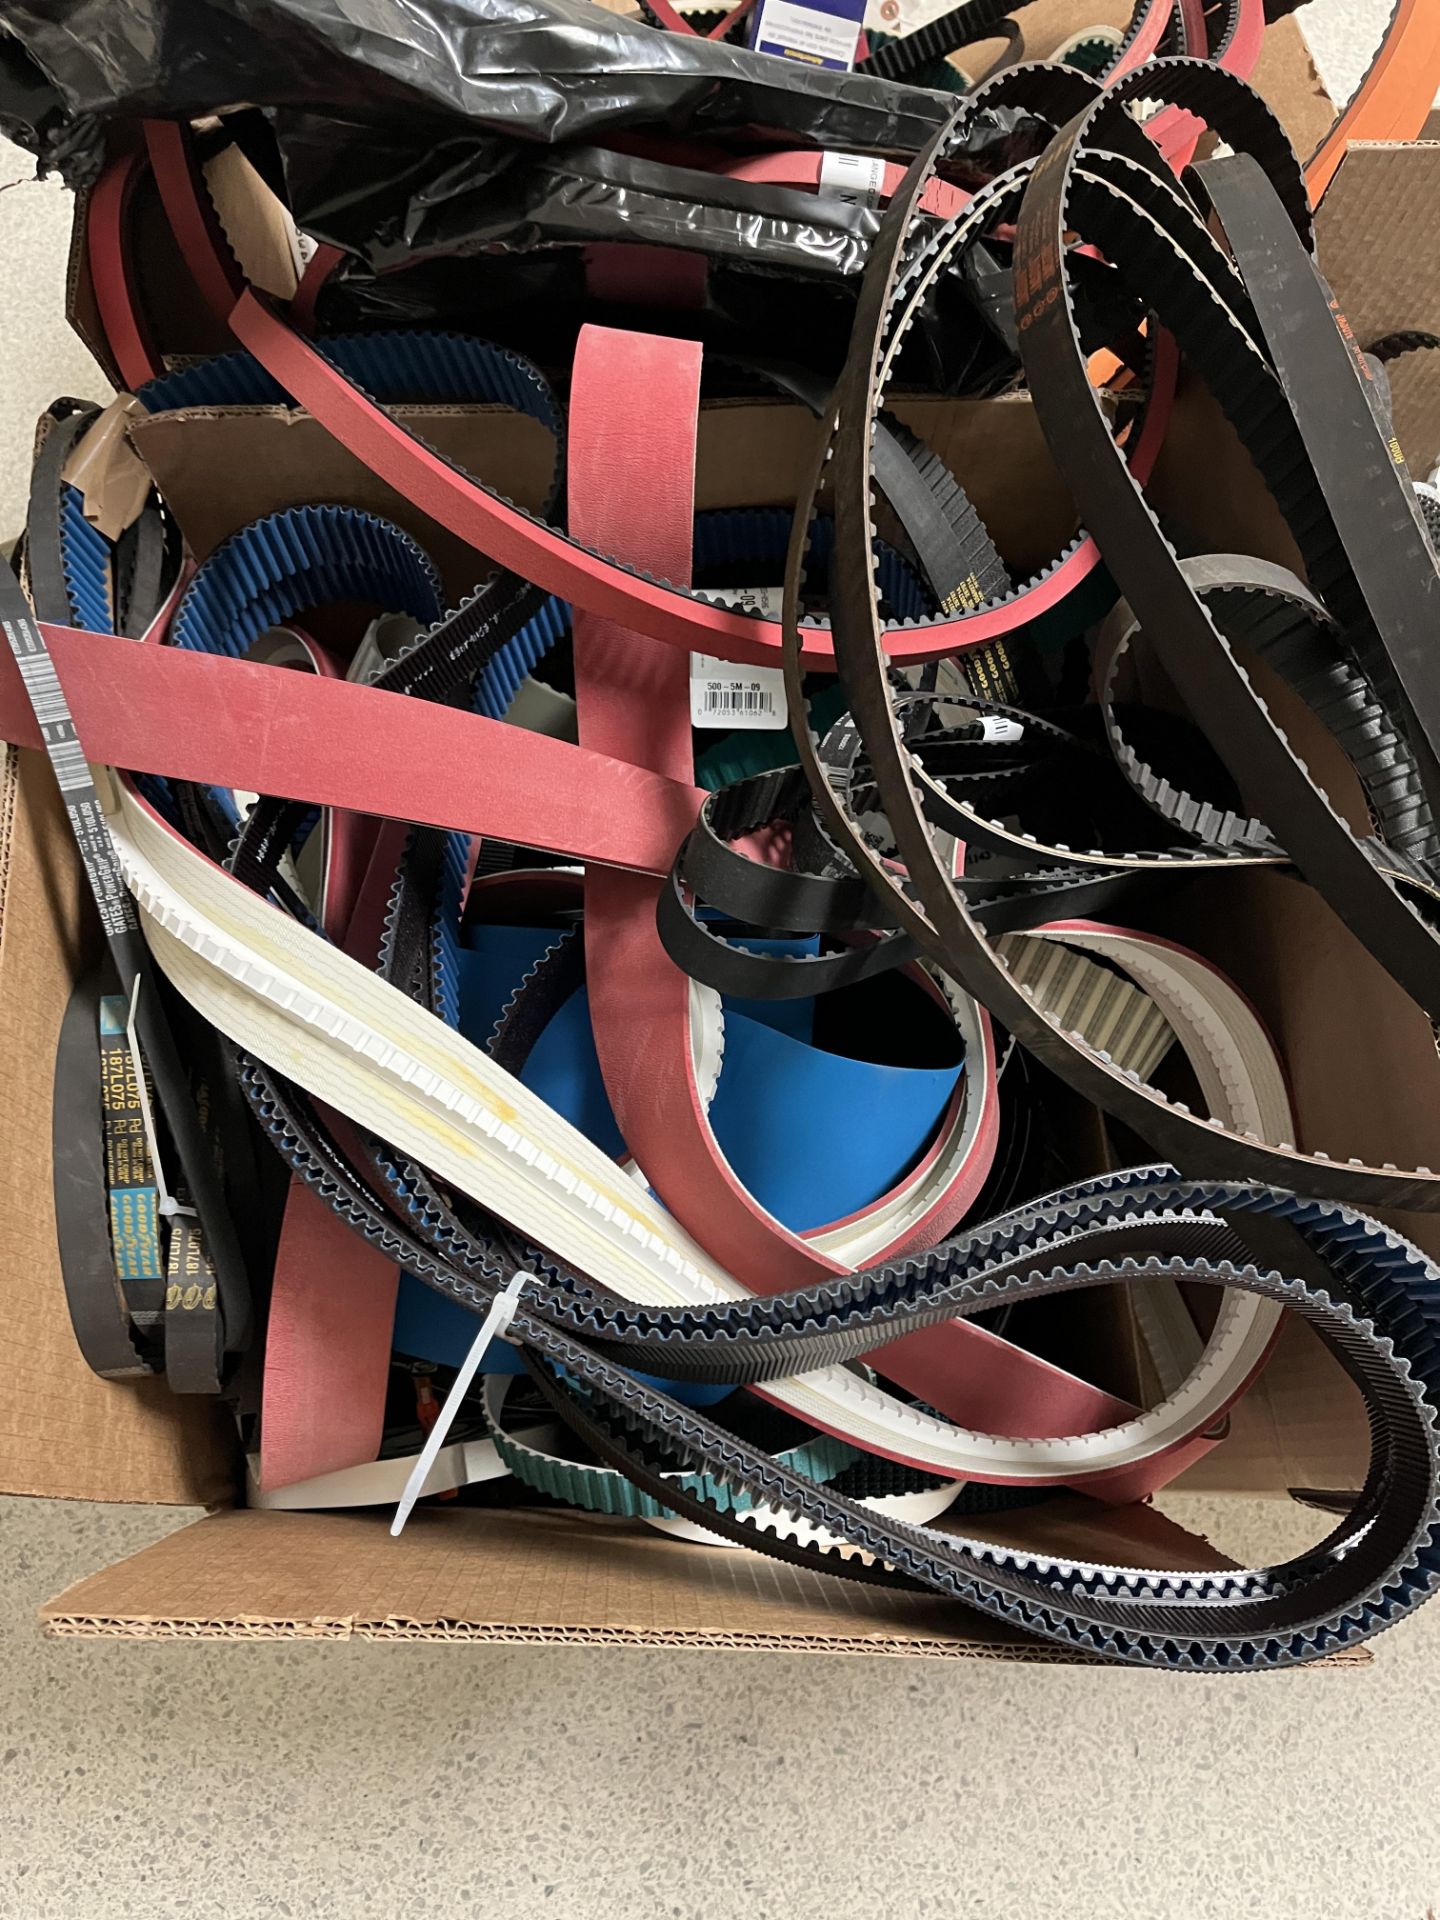 Pallet of drive belts. - Image 6 of 6